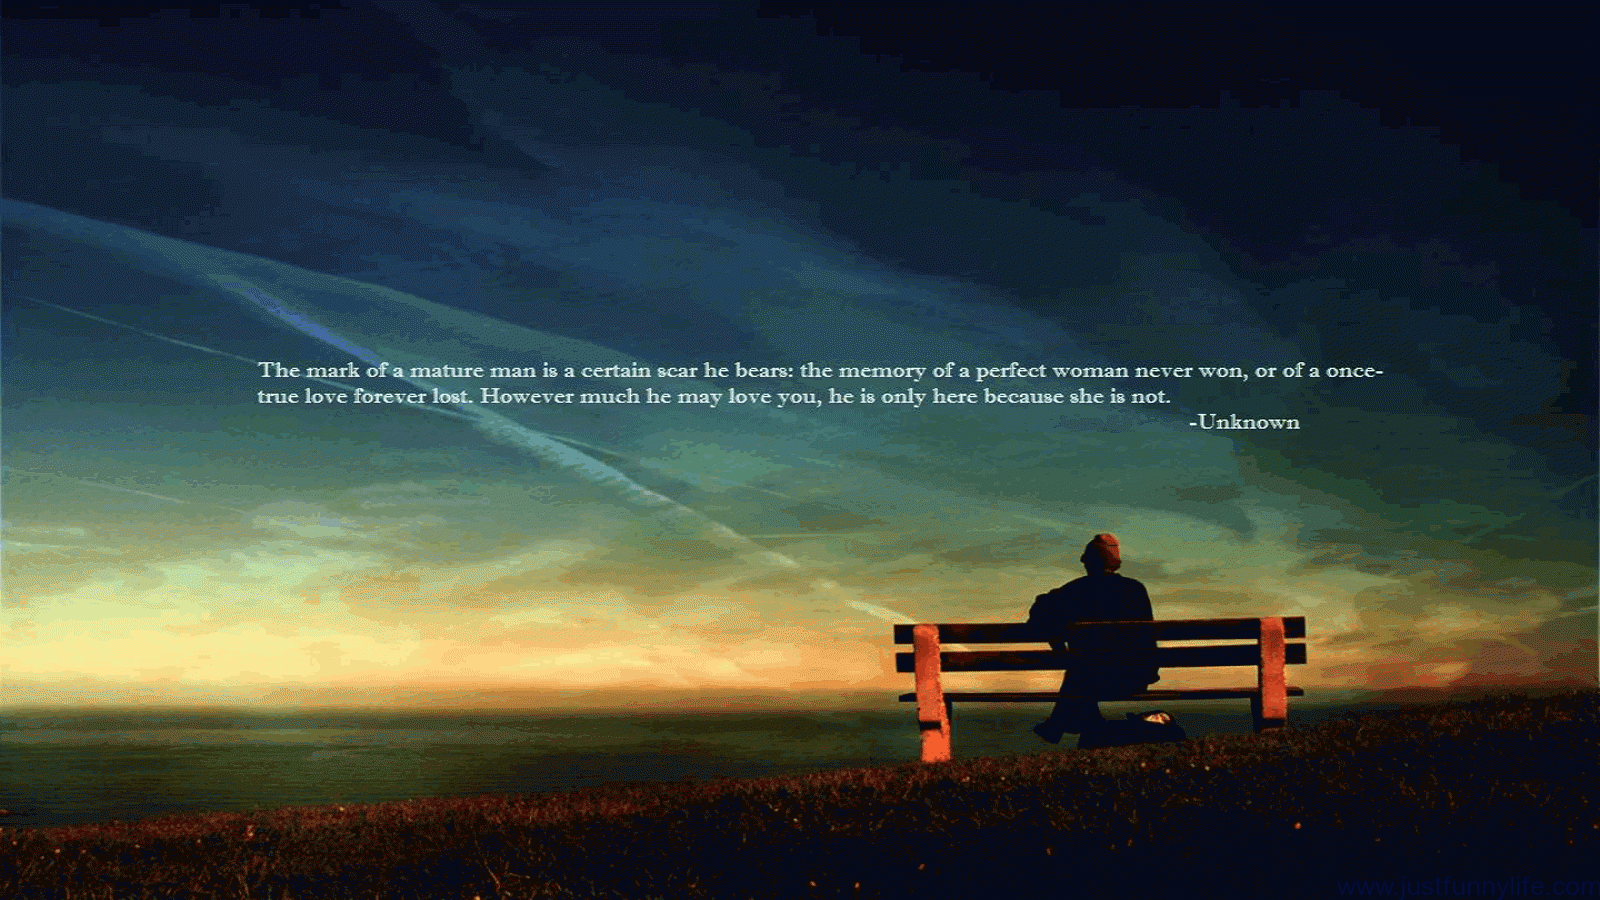 Love Quots Quotes Picture Free Widescreen Hd Lonely Man. Illusion Quotes, Love Quotes Wallpaper, Maturity Quotes